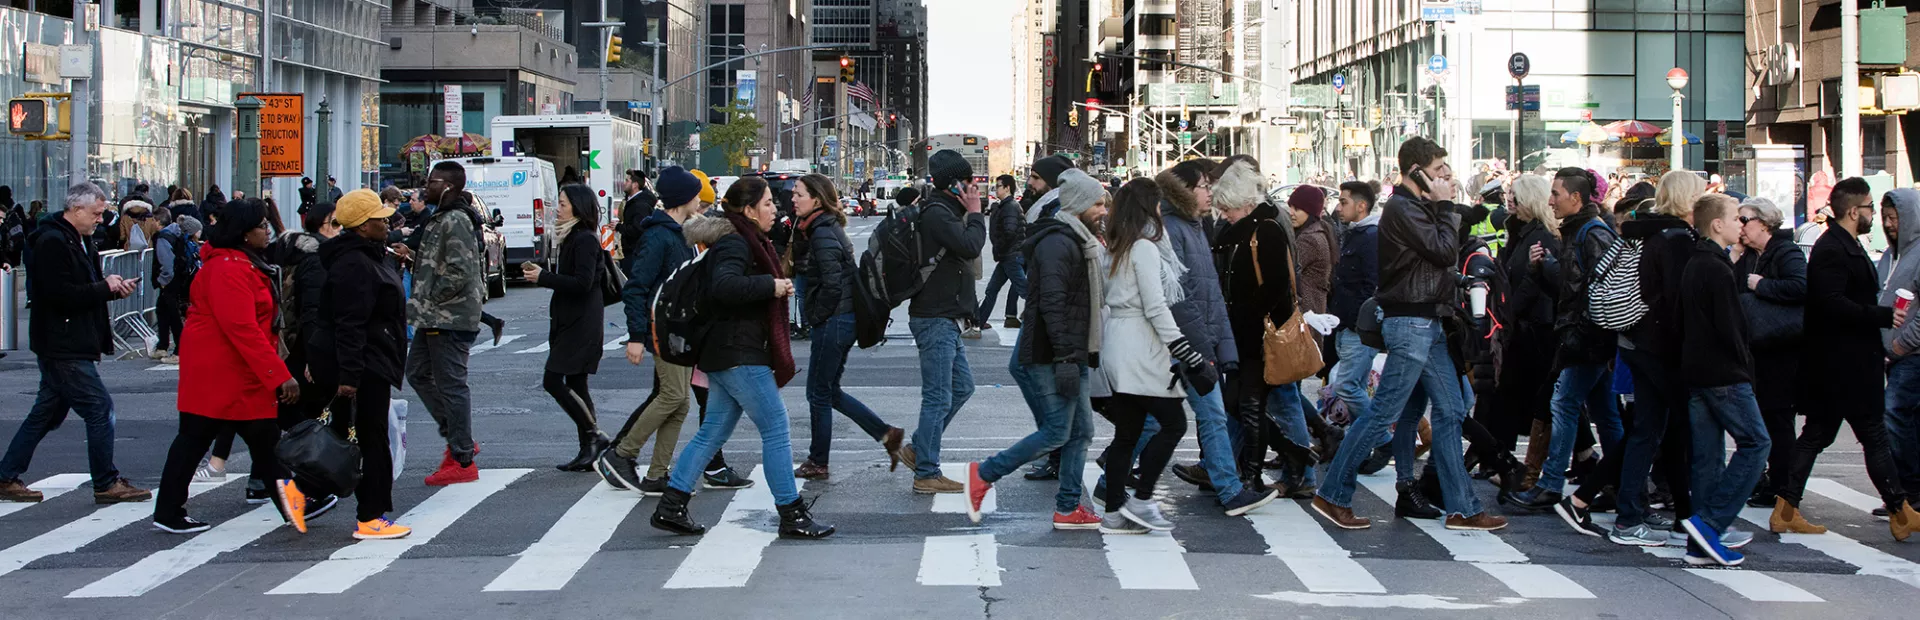 Crowd crossing a busy intersection